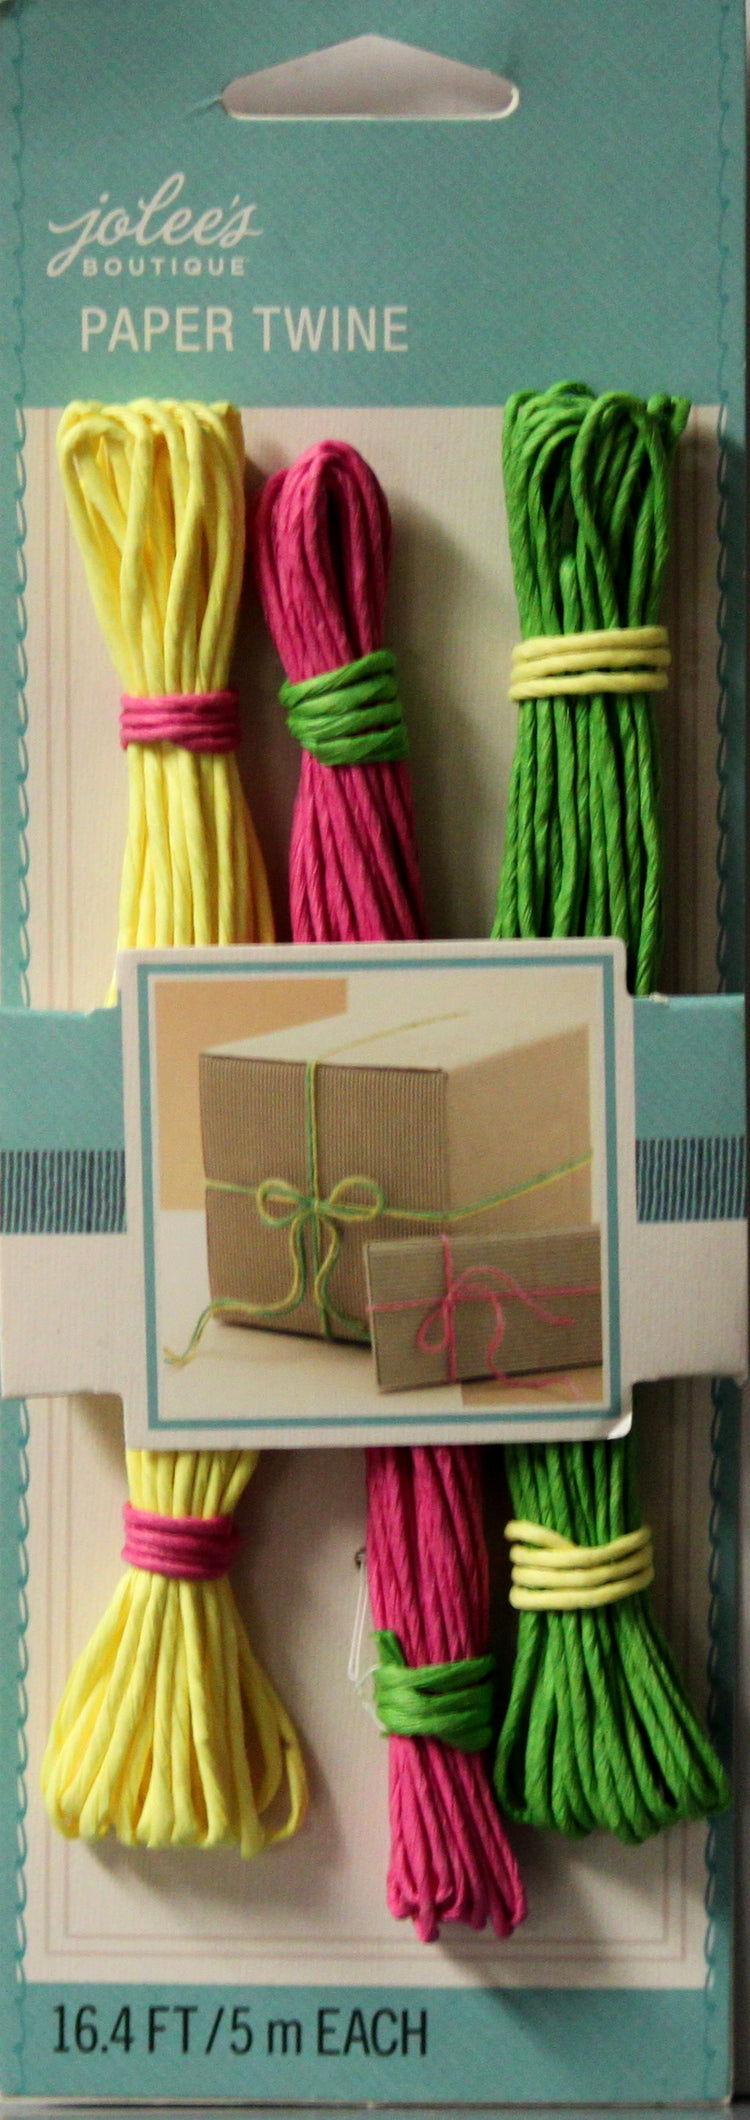 Jolee's Boutique Paper Twine Yellow/Pink/Green Set